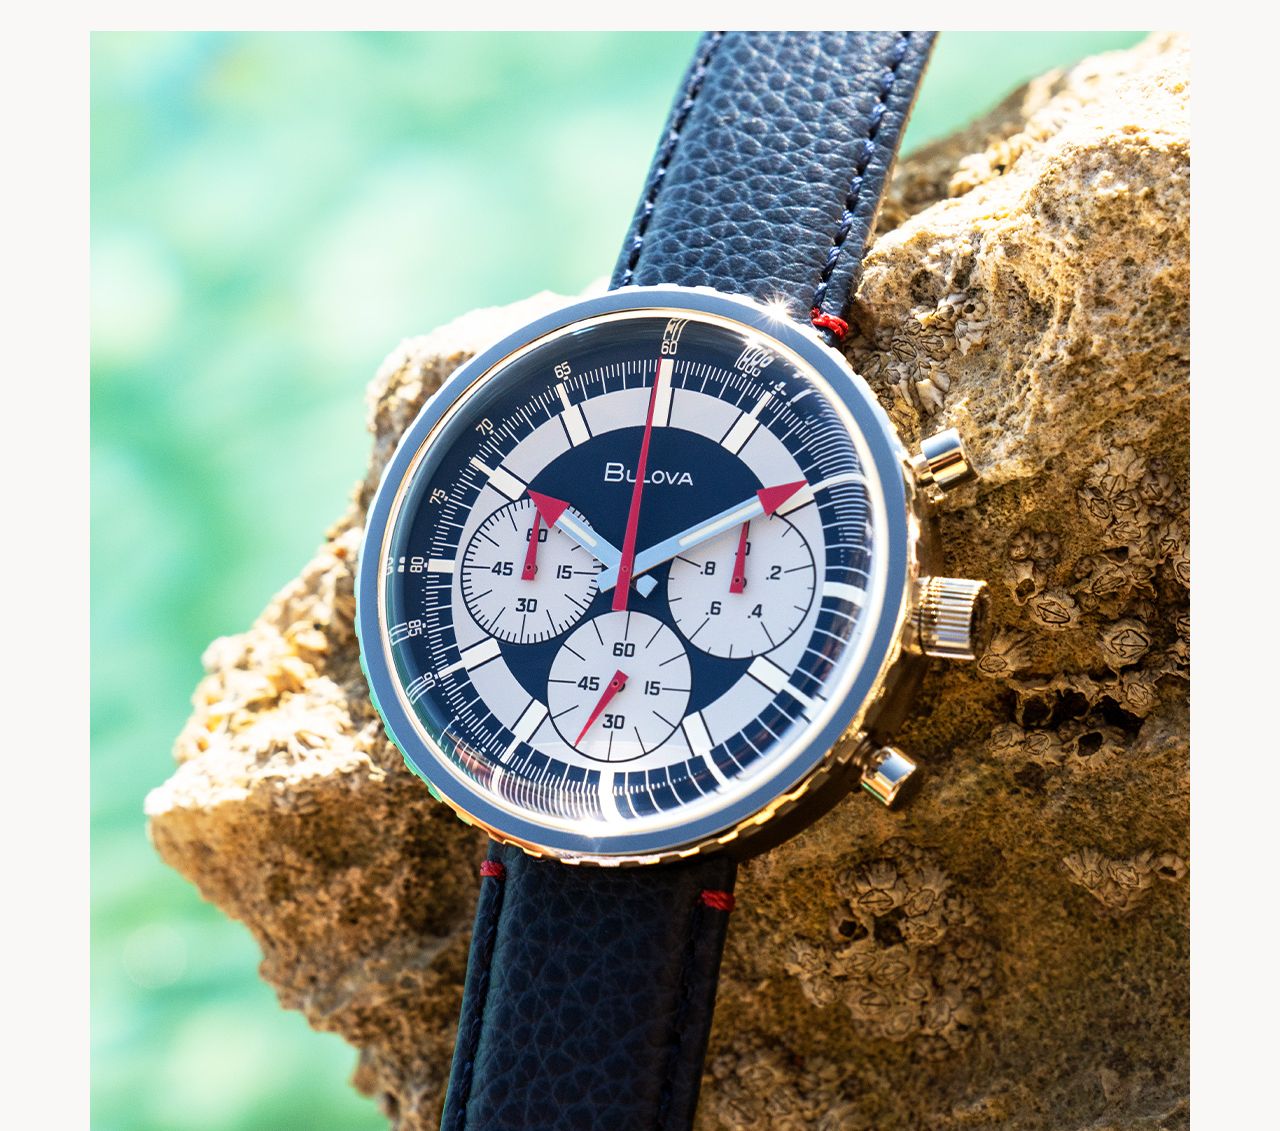 A men's Chronograph C in a silver-tone stainless steel case with iconic blue and white dial, red accents complemented by a blue leather strap with red safety stitching and deployant buckle closure.